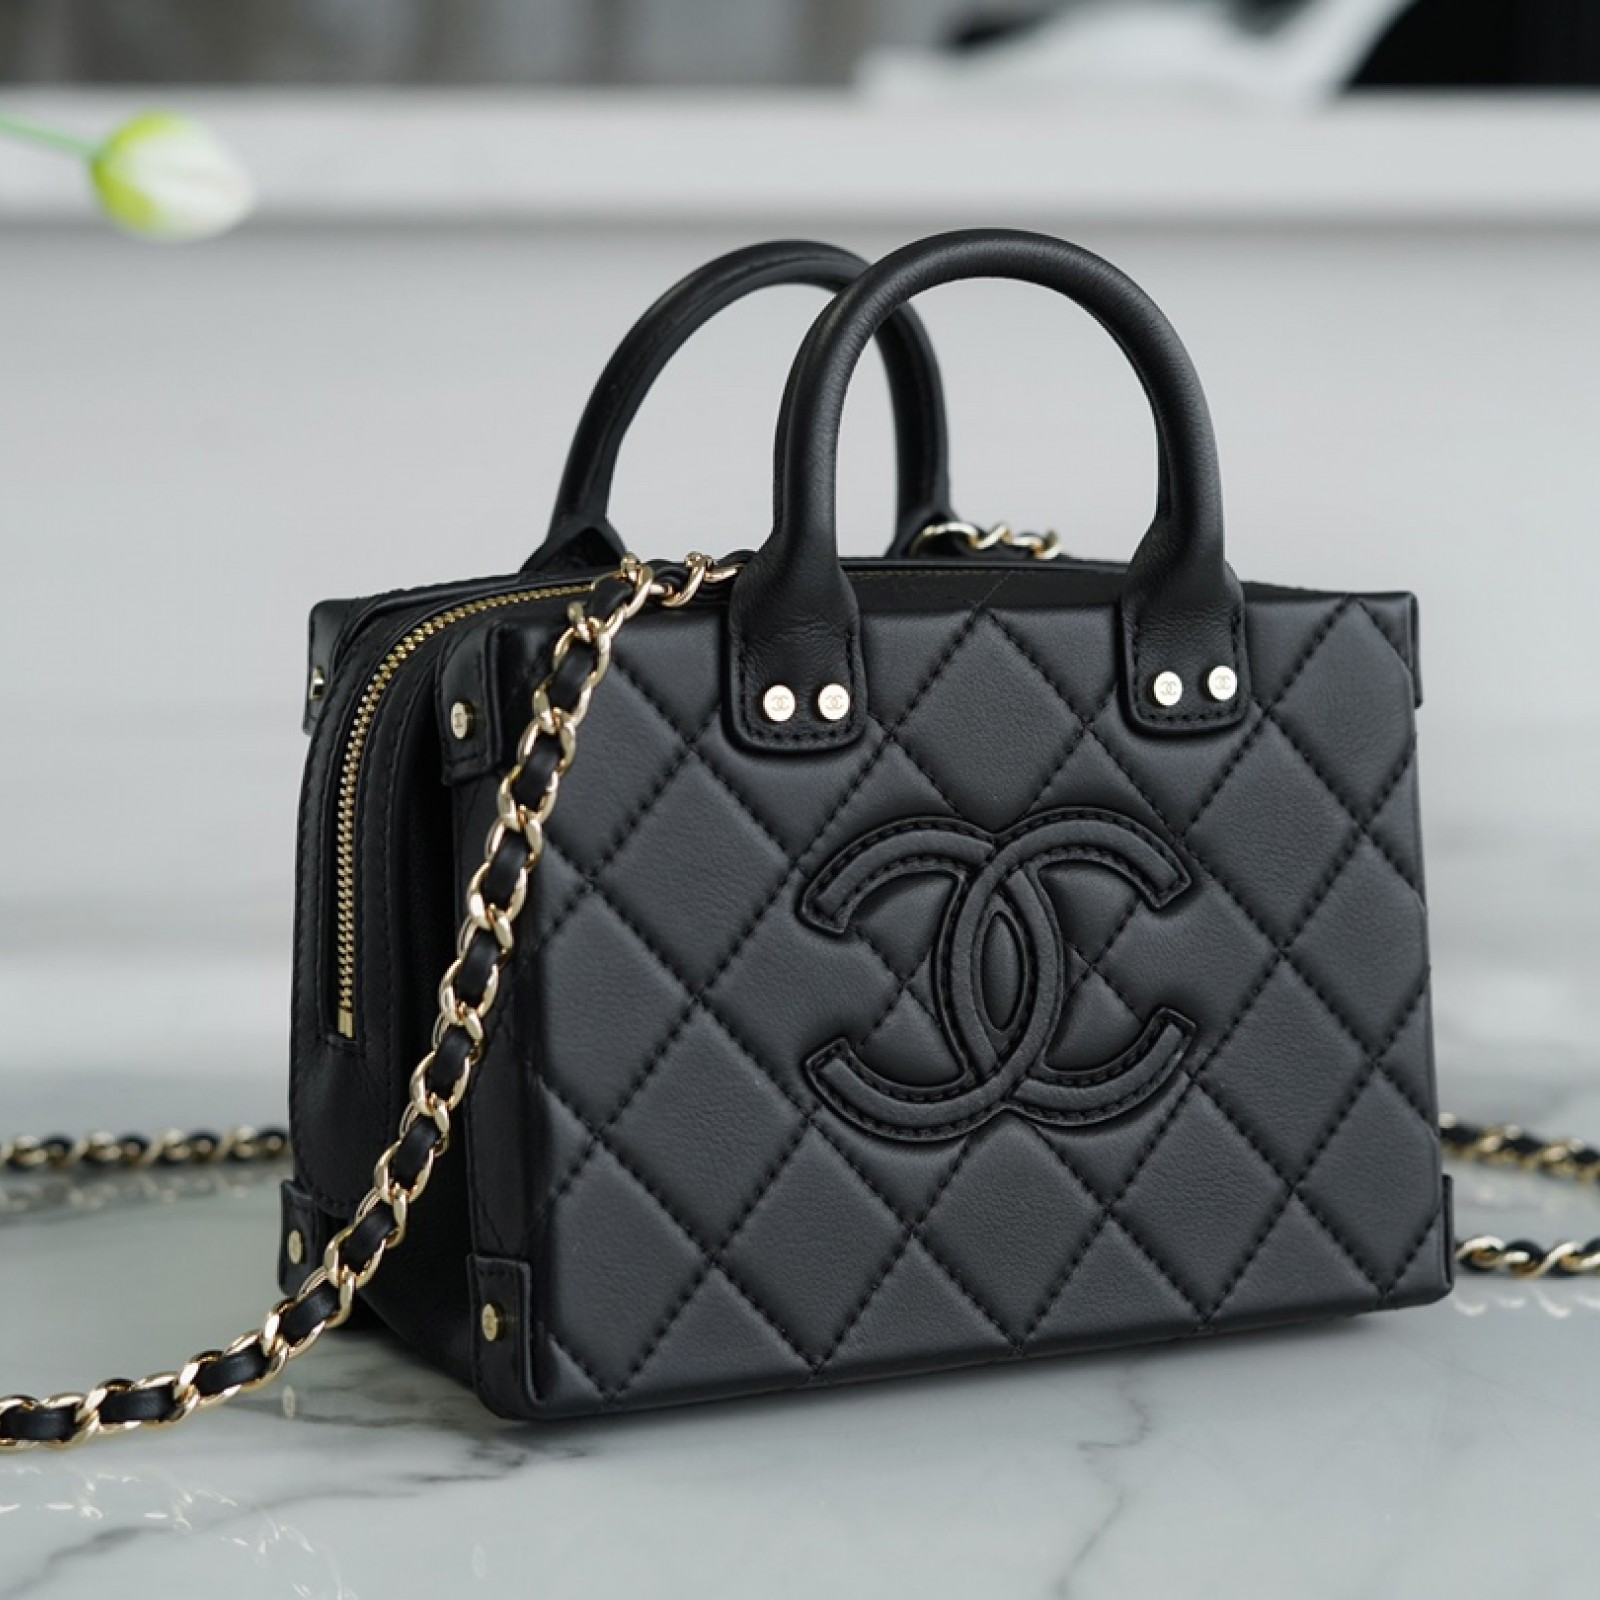 CHANEL SMALL STUDDED SQUARE VANITY CASE